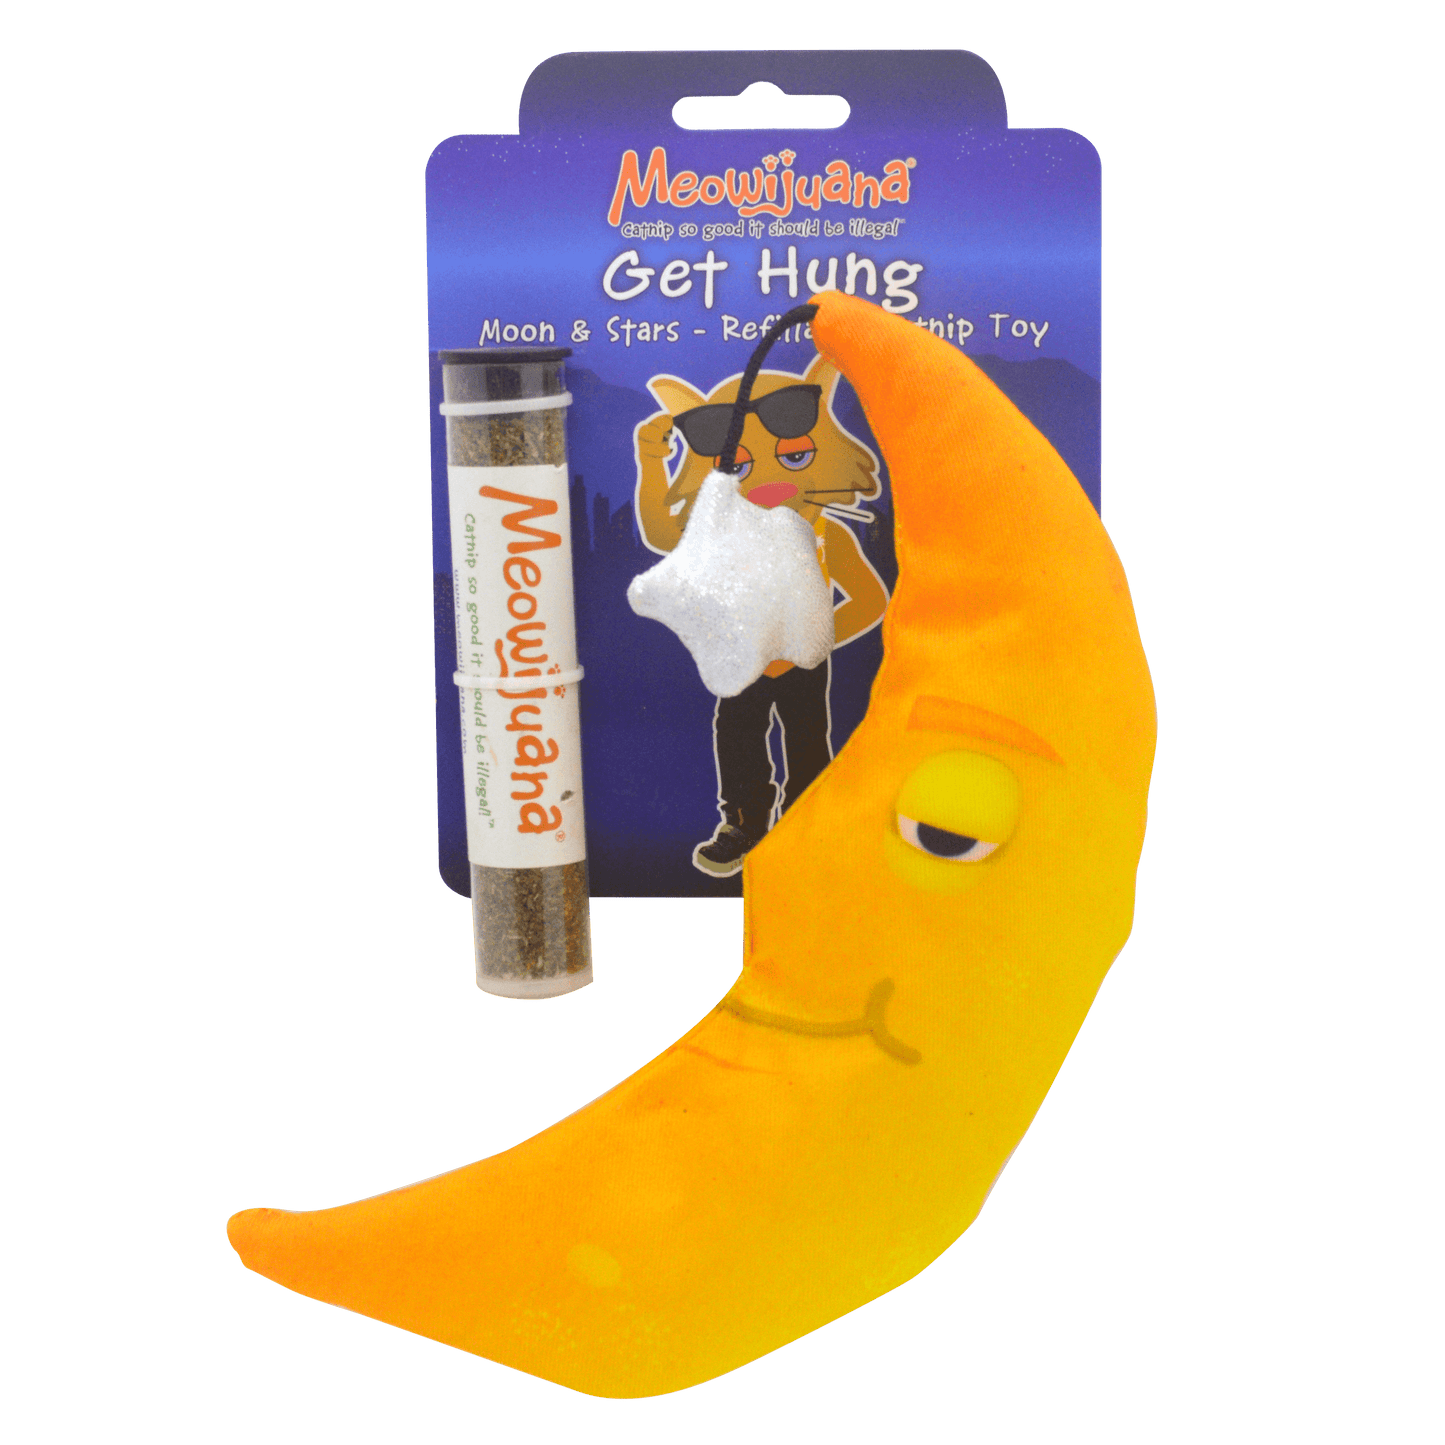 Get Hung Refillable Moon and Stars